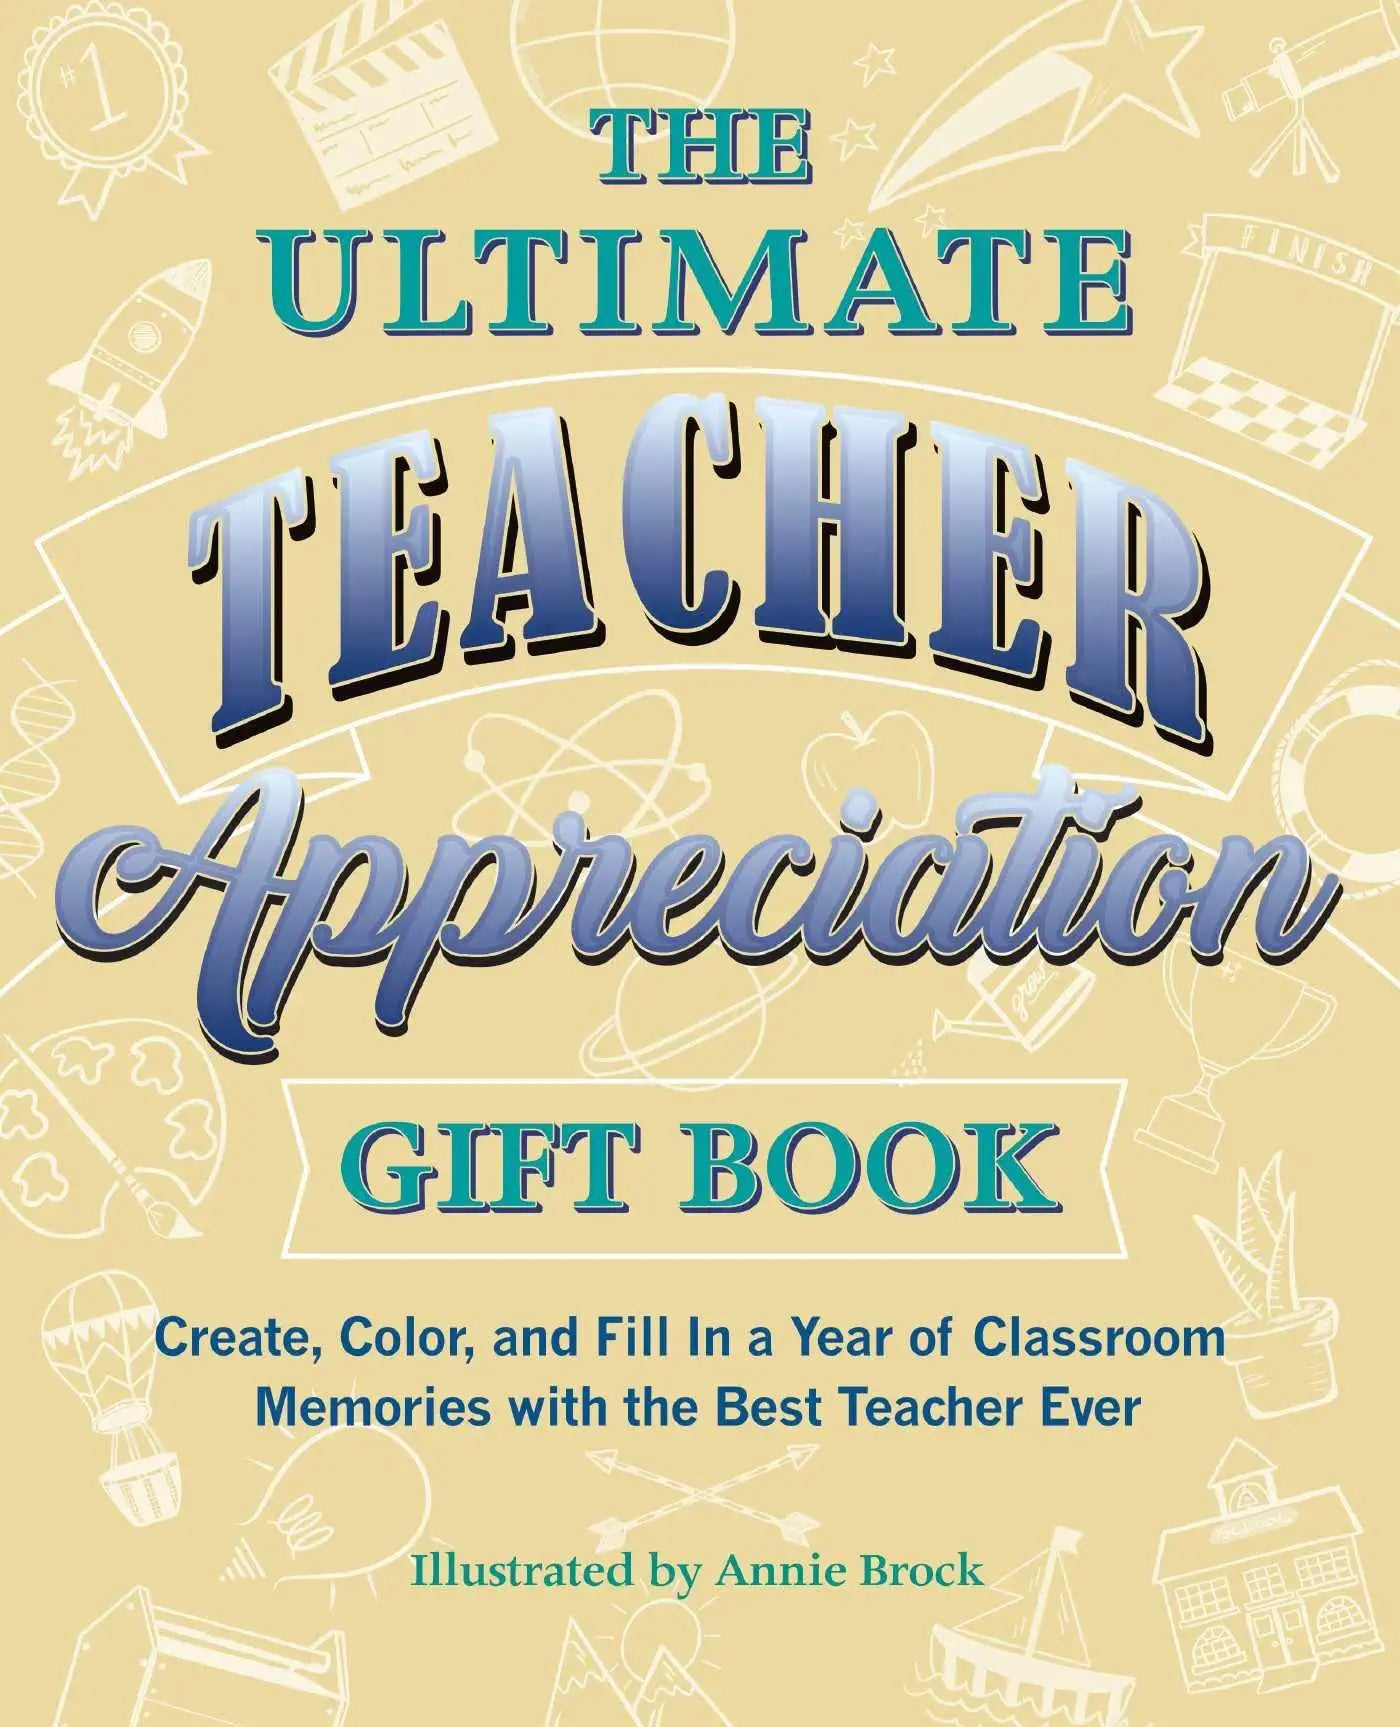 The Ultimate Teacher Appreciation Gift Book: Create, Color, and Fill In a Year of Classroom Memories with the Best Teacher Ever (Books for Teachers) - Paperback